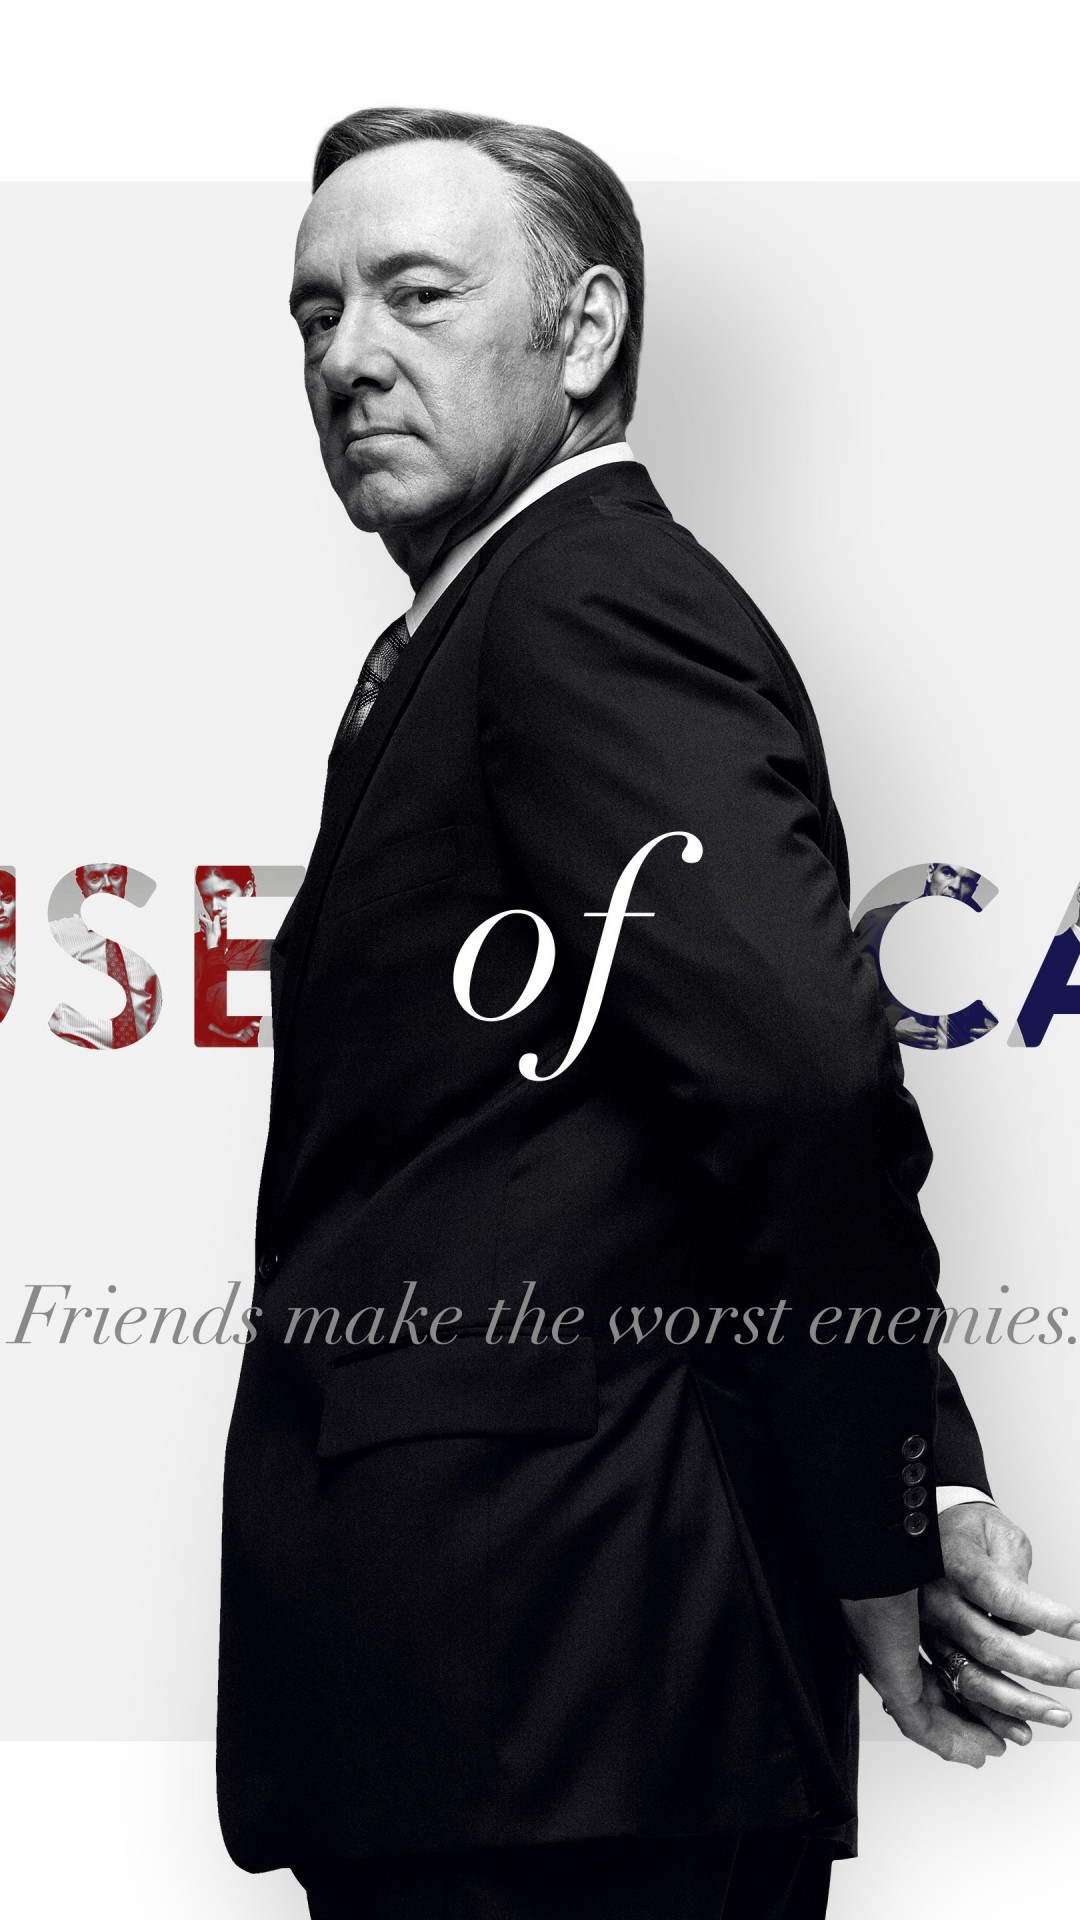 Frank Underwood - House of Cards Wallpaper for SONY Xperia Z3